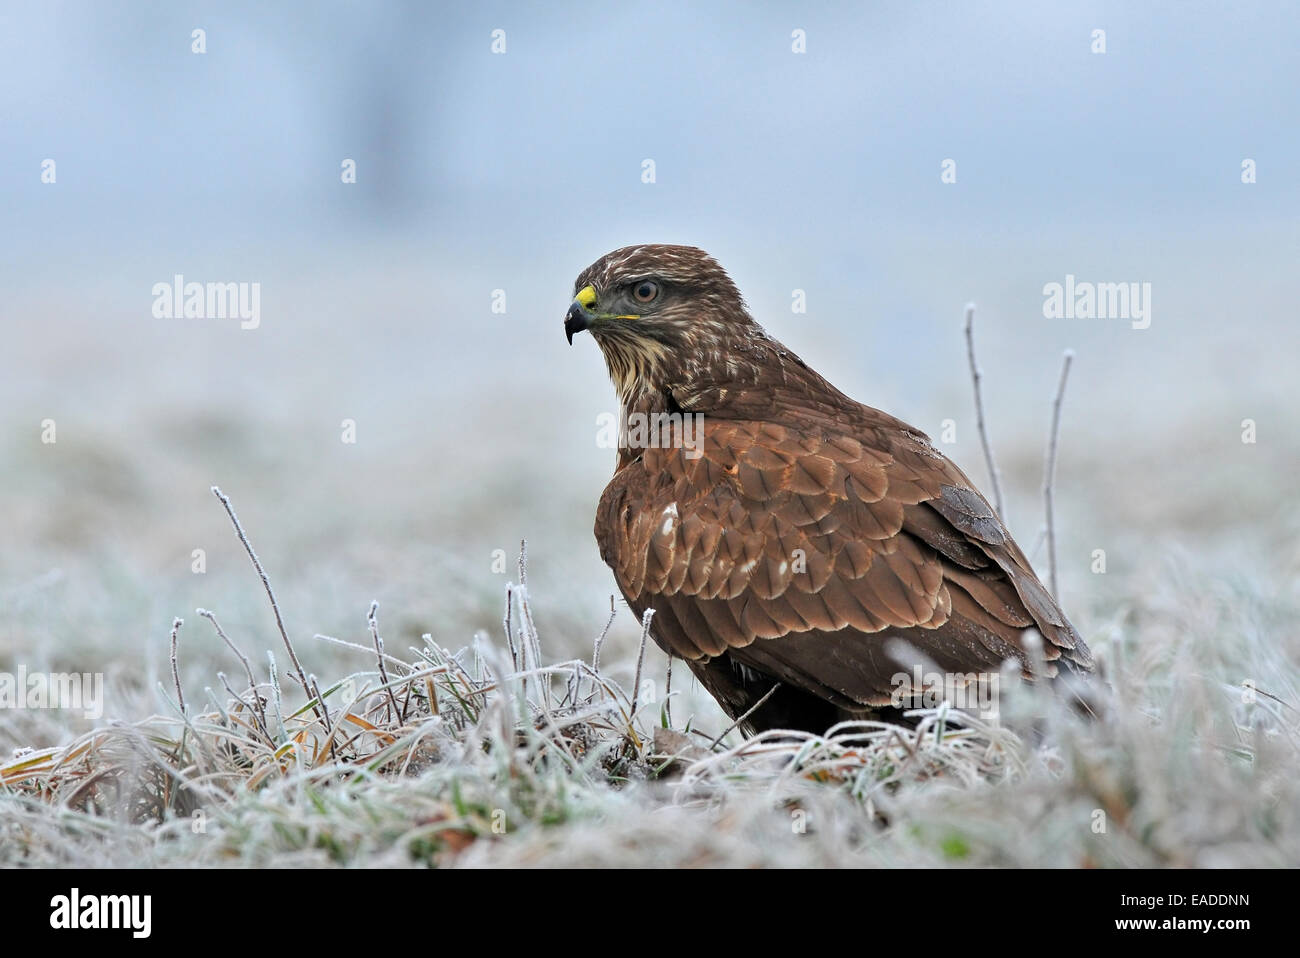 Common buzzard standing on a frost covered ground Stock Photo